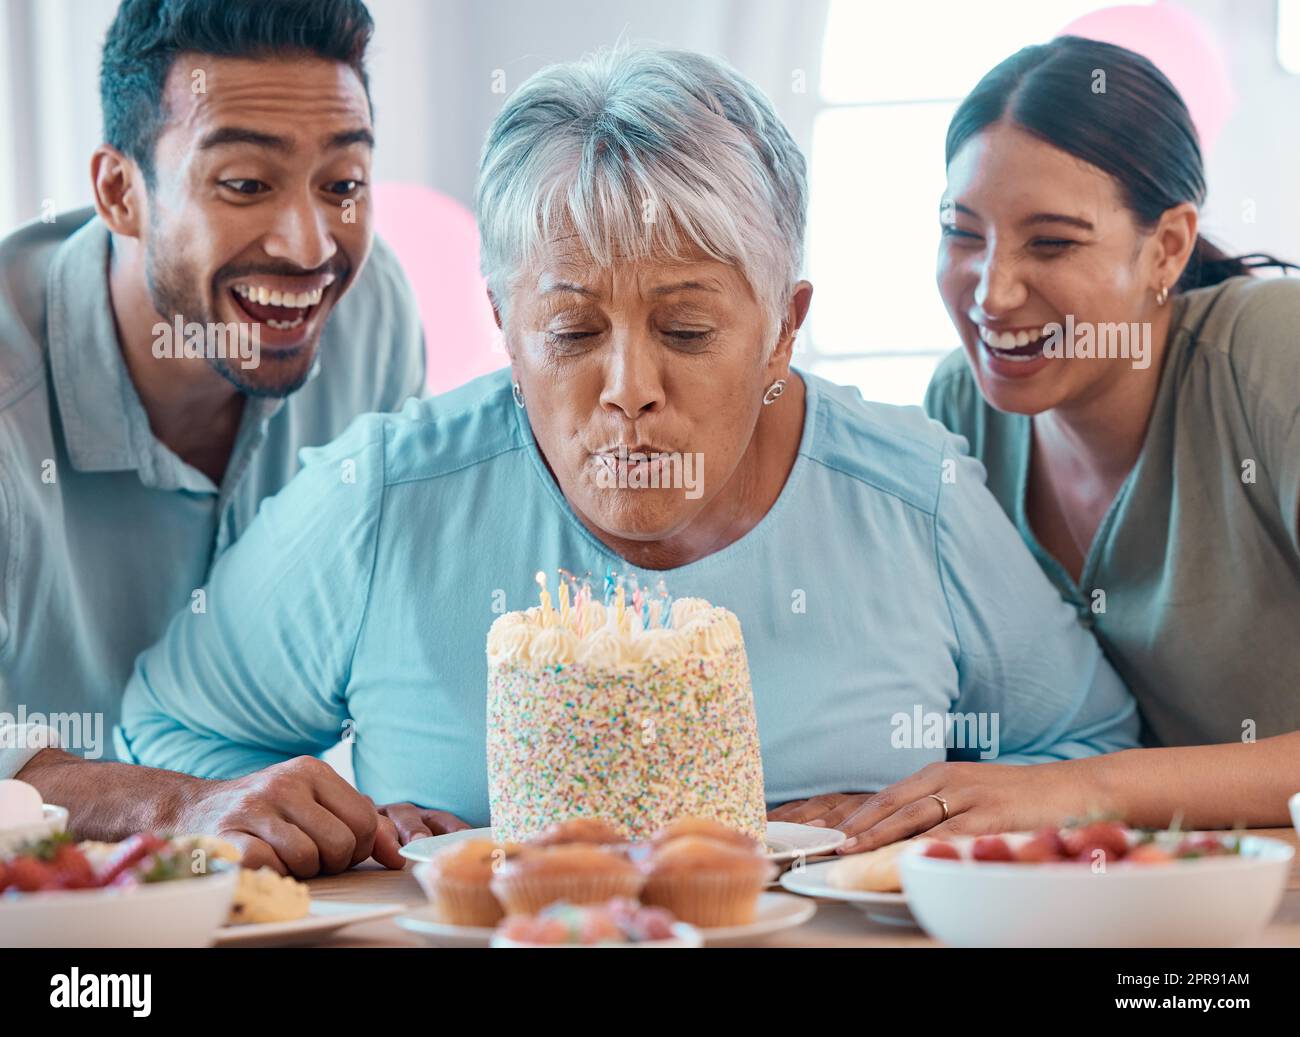 Look at her go. two young adults celebrating a birthday with a mature woman at home. Stock Photo